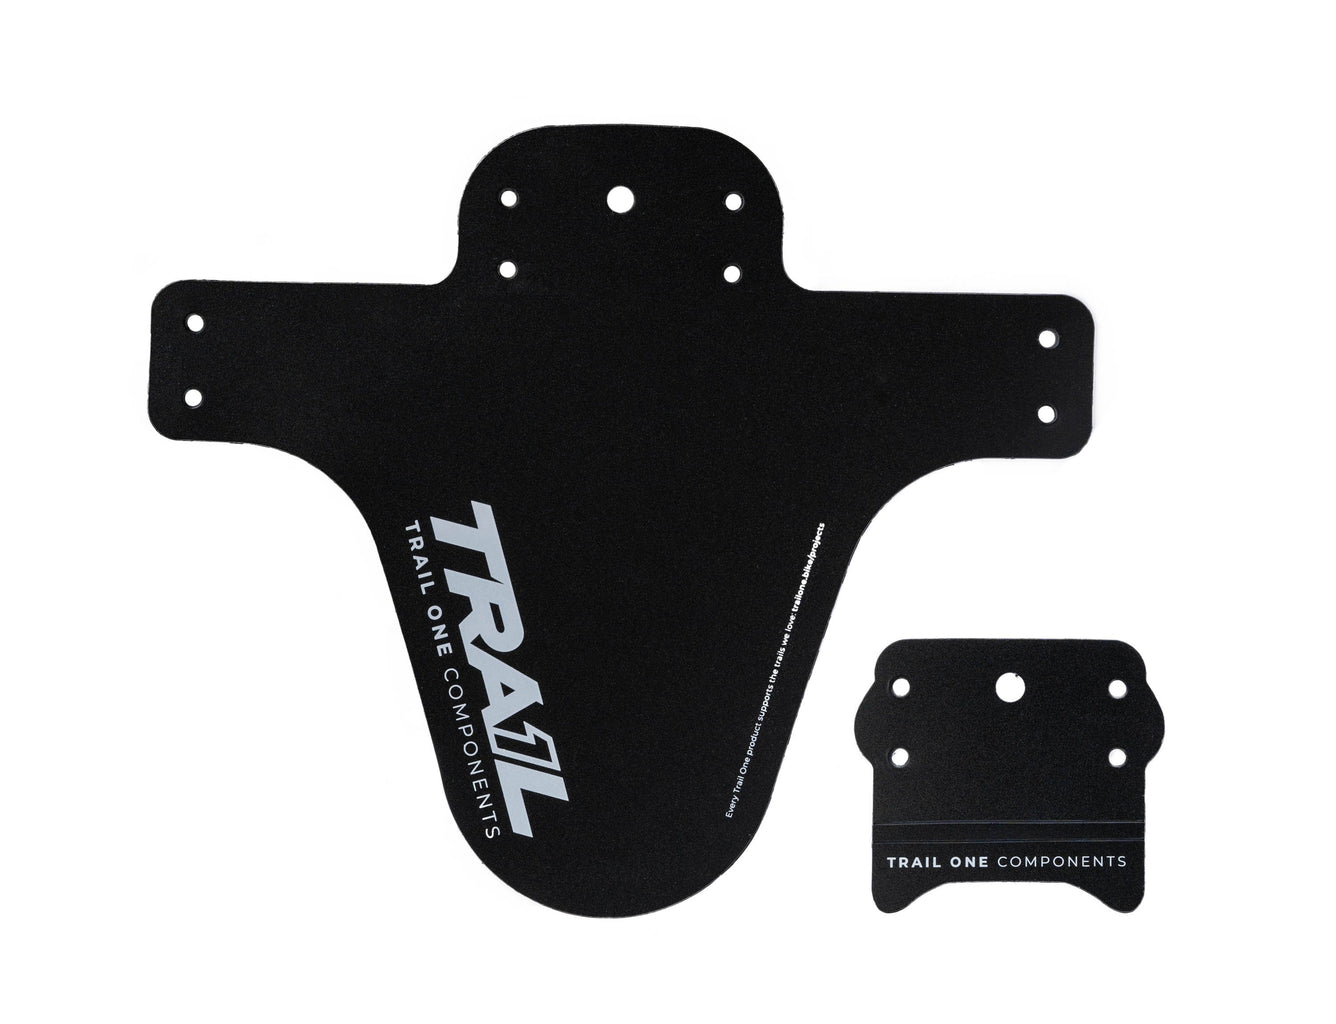 Trail One Components Fender MPN: 2015-2 Clip-On Fender T1 Fender